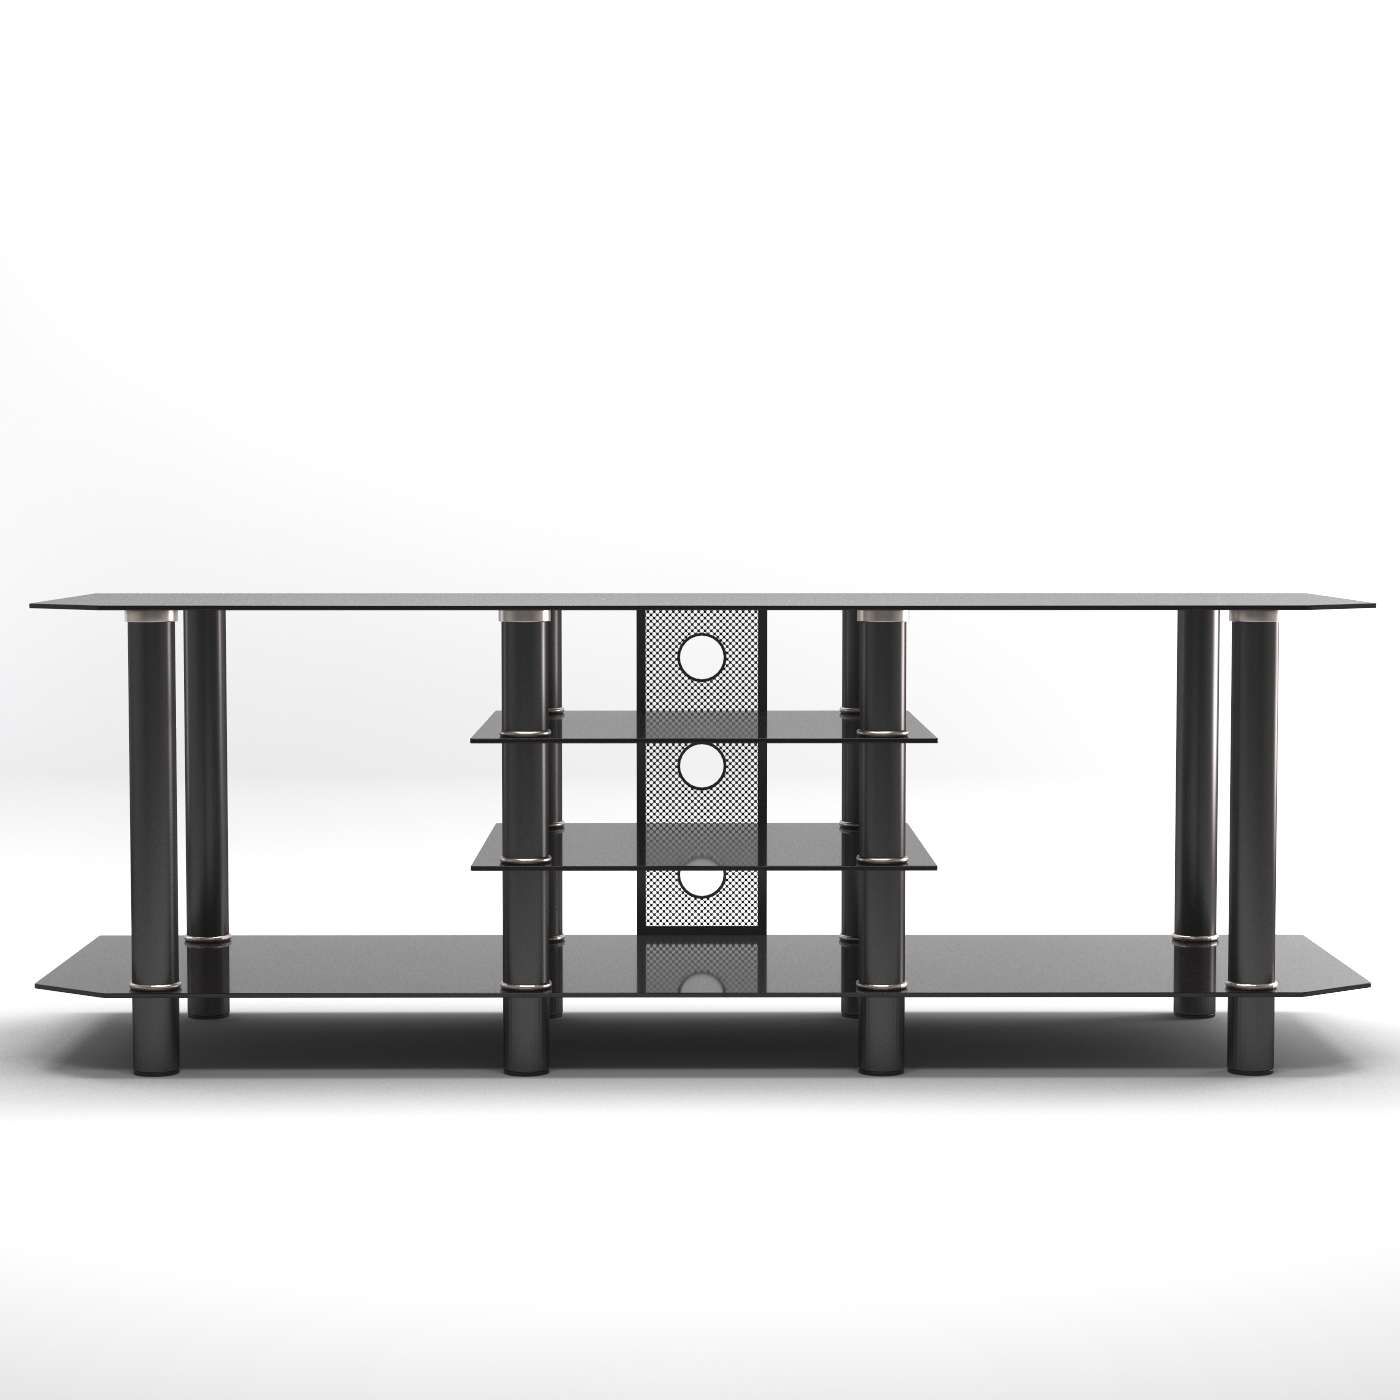 Salerno 60 Inch Glass Tv Stand In Black For Modern Glass Tv Stands (View 11 of 15)